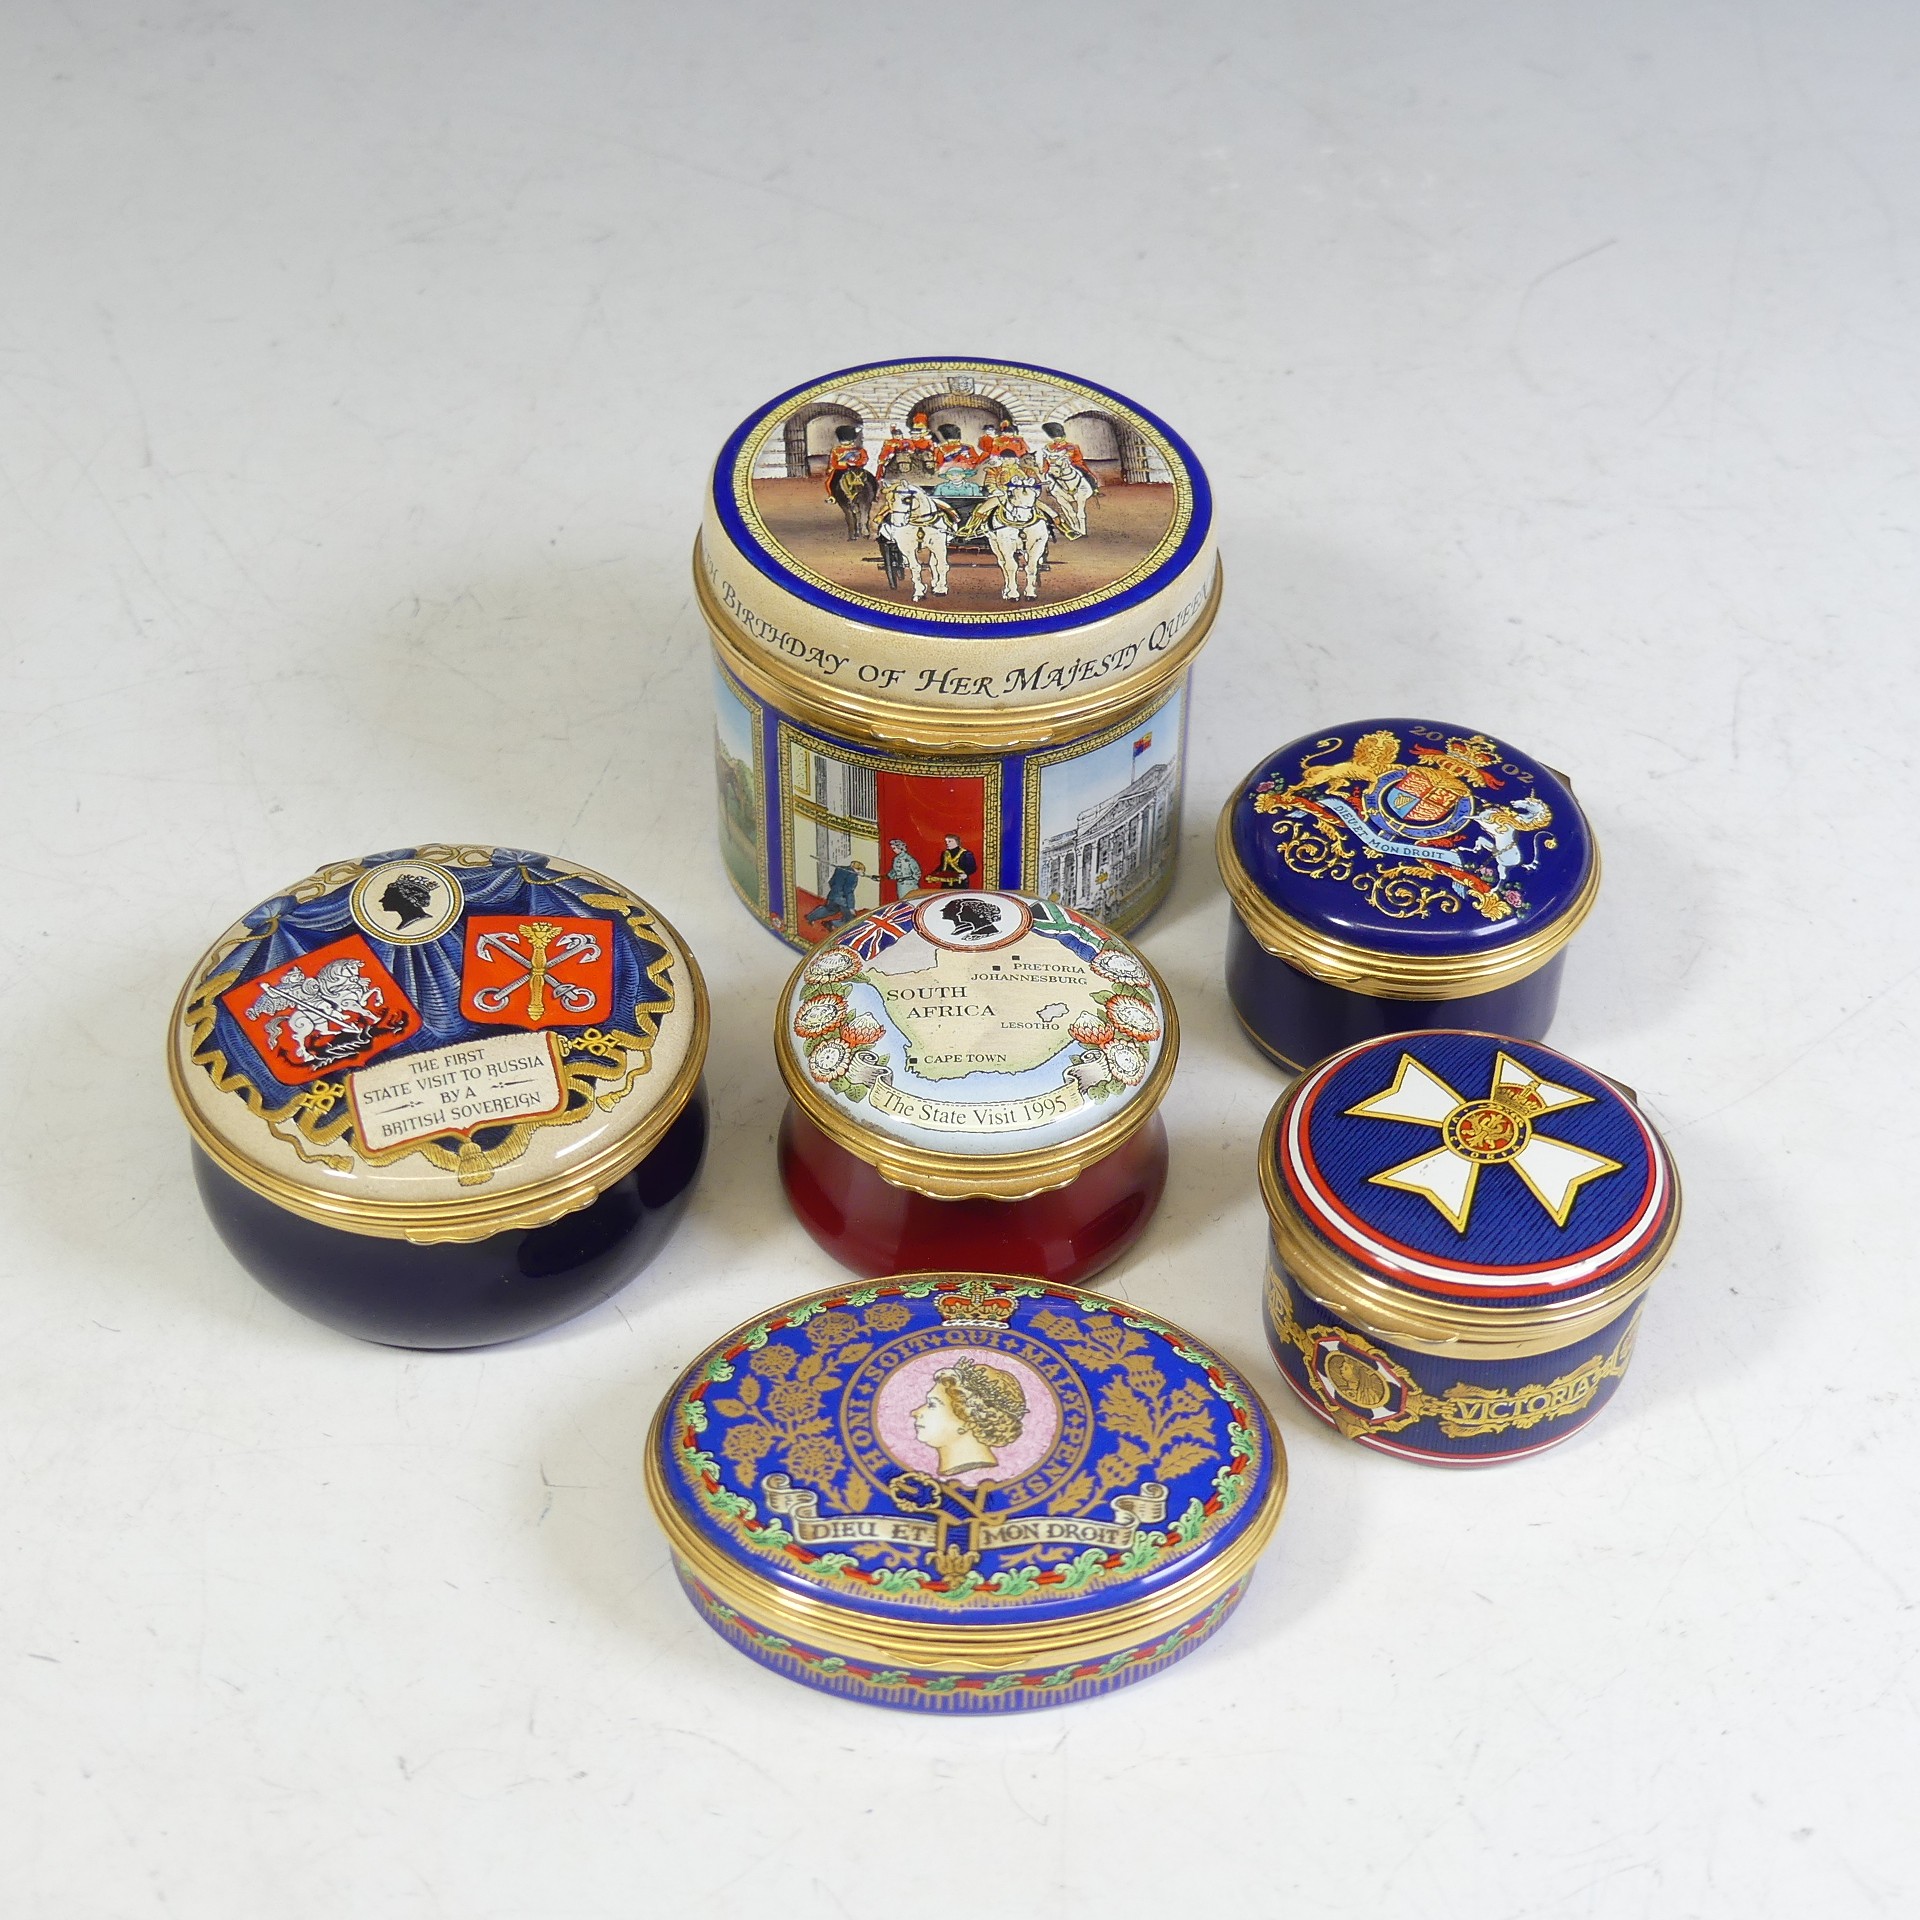 Royal Commemorative Halcyon Days Enamels Boxes: six hinged circular boxes, including The First State